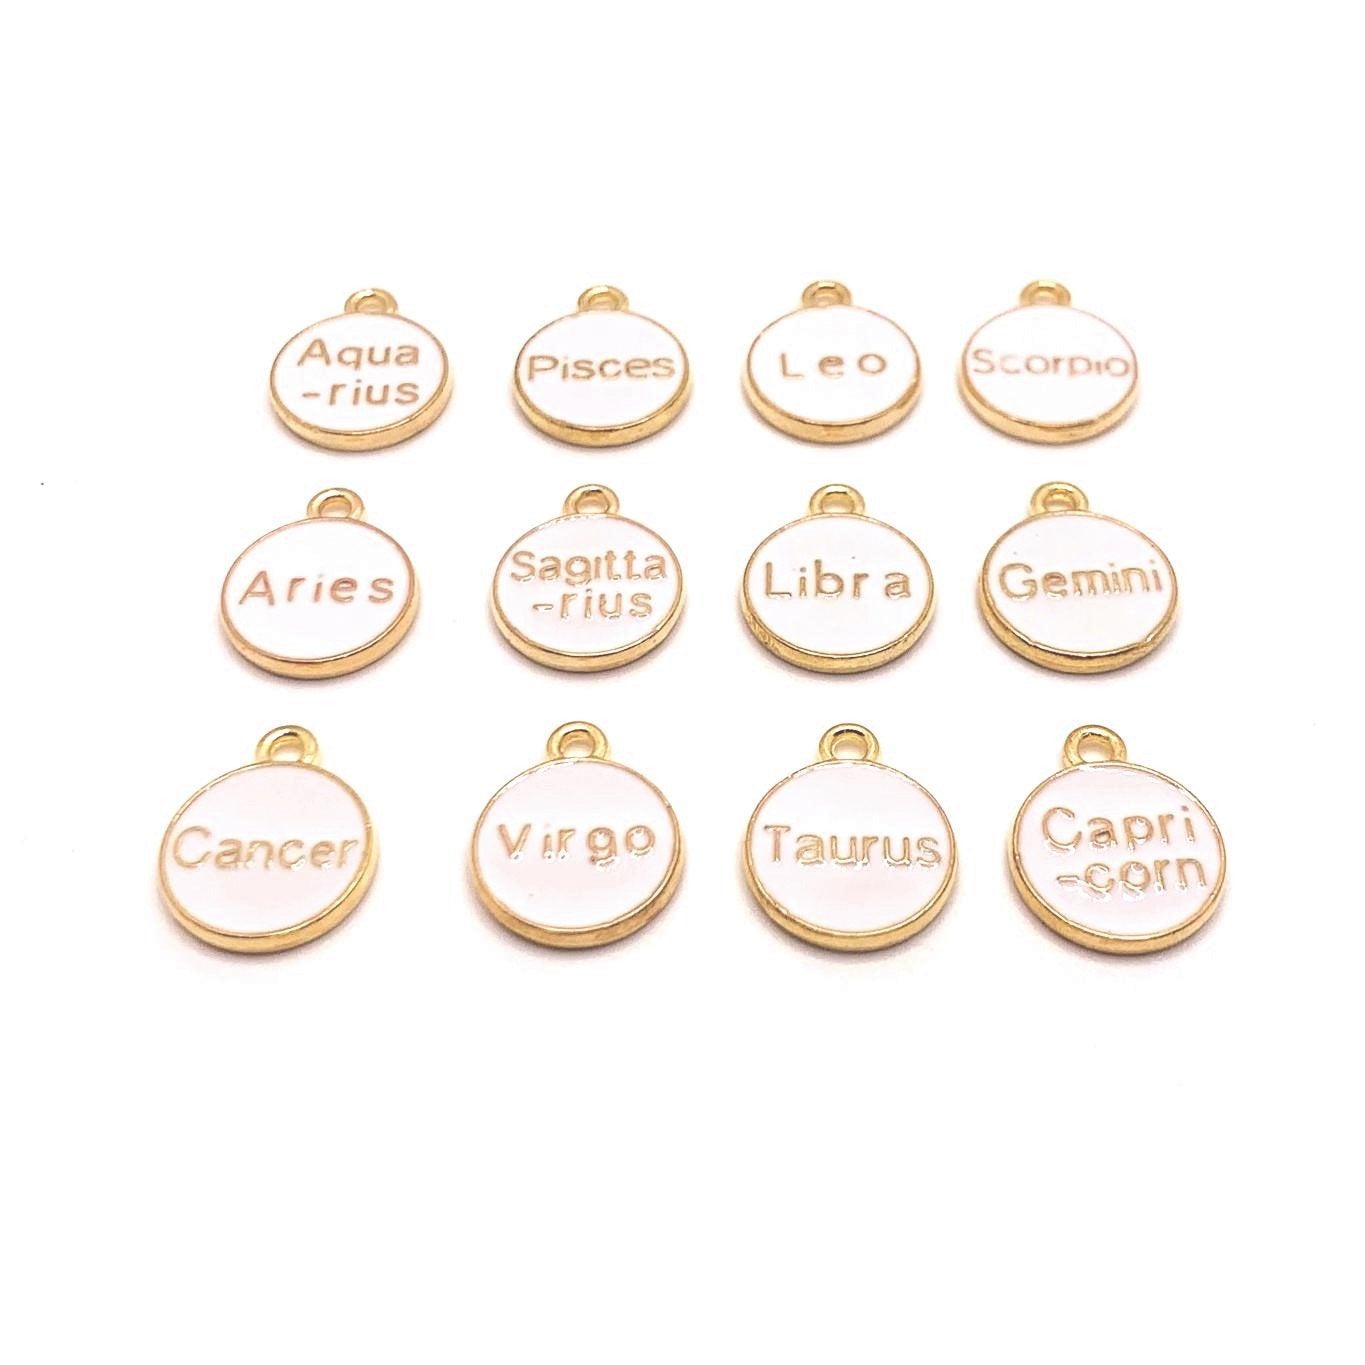 12 or 60 Pieces: White Enamel and Gold Zodiac/Astrology Charms, Double Sided